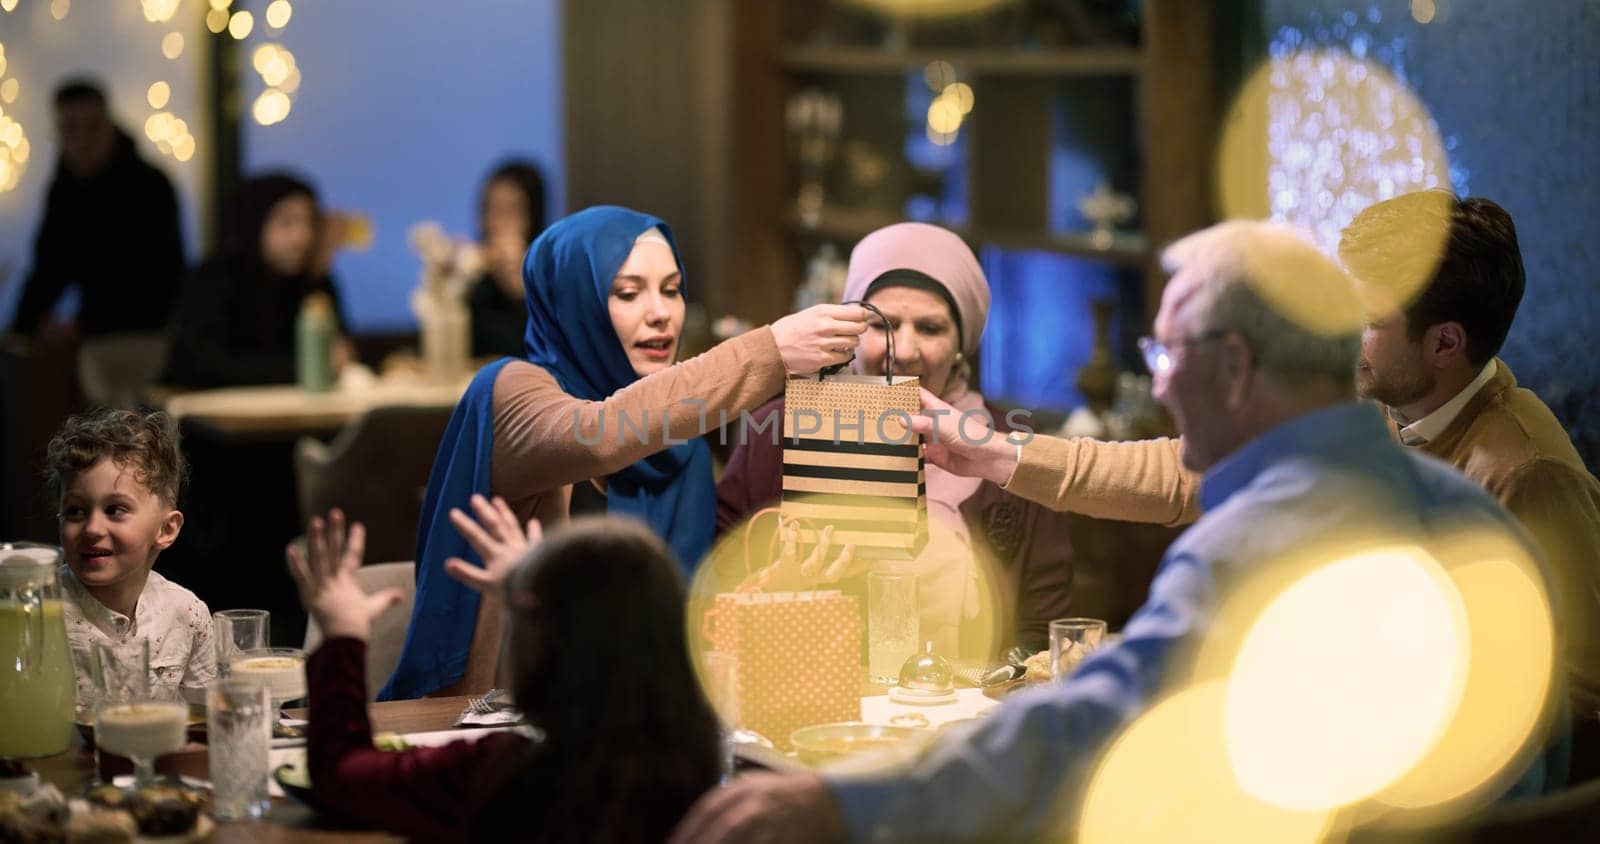 Grandparents arrive at their children's and grandchildren's gathering for iftar in a restaurant during the holy month of Ramadan, bearing gifts and sharing cherished moments of love, unity, and cultural exchange, as they eagerly await their meal together.